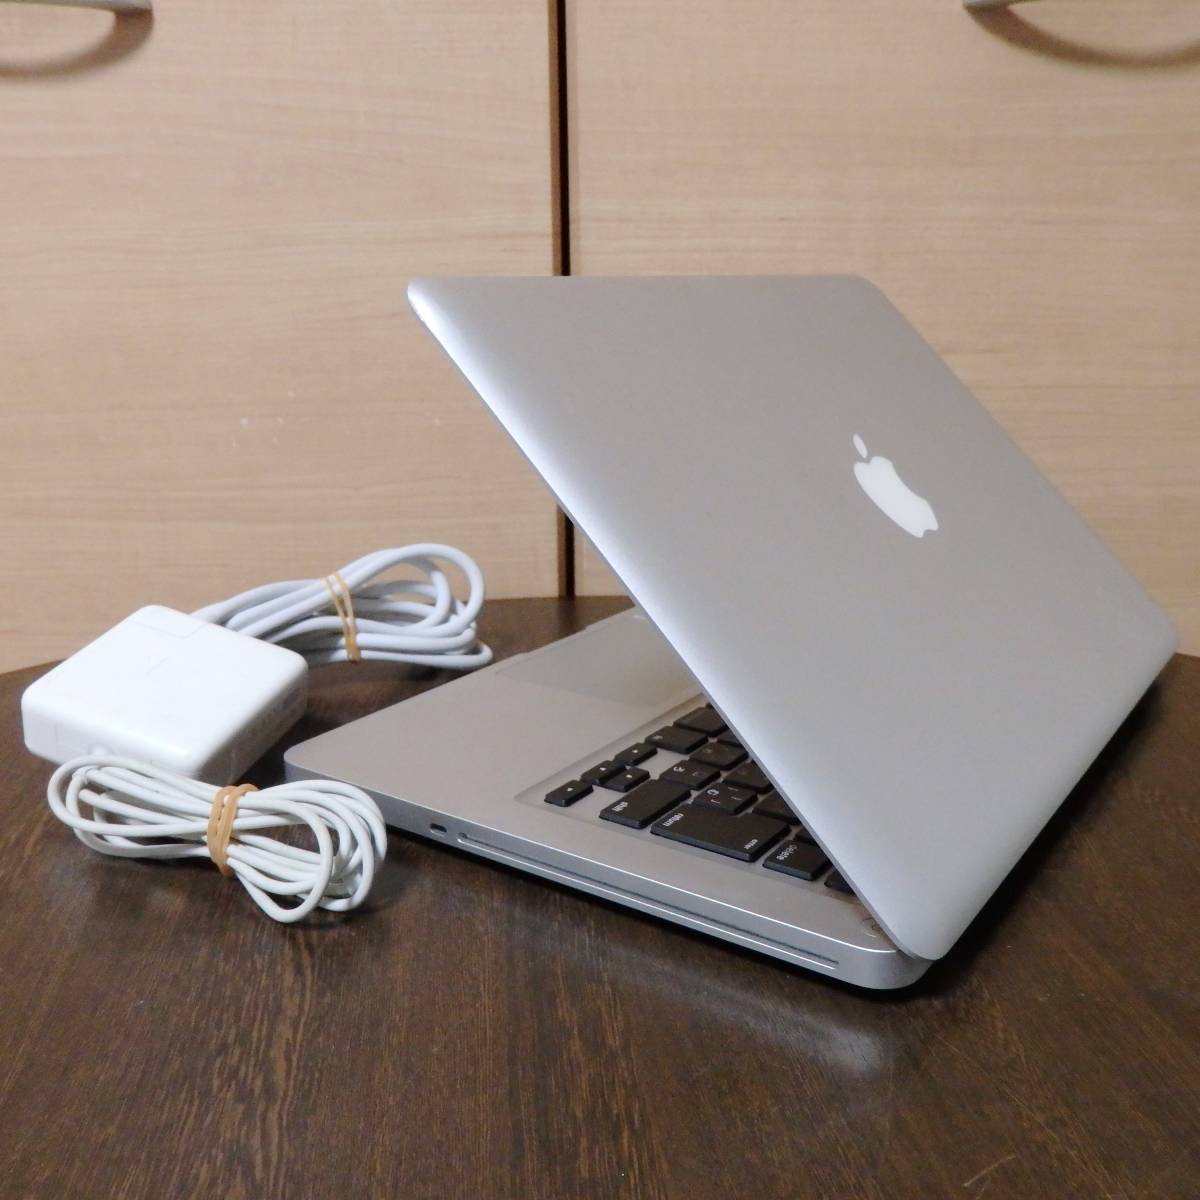 □MacBook Pro 13.3（Core i5 2.3GHz/8GB/SSD 1TB/9回）カスタマイズ 